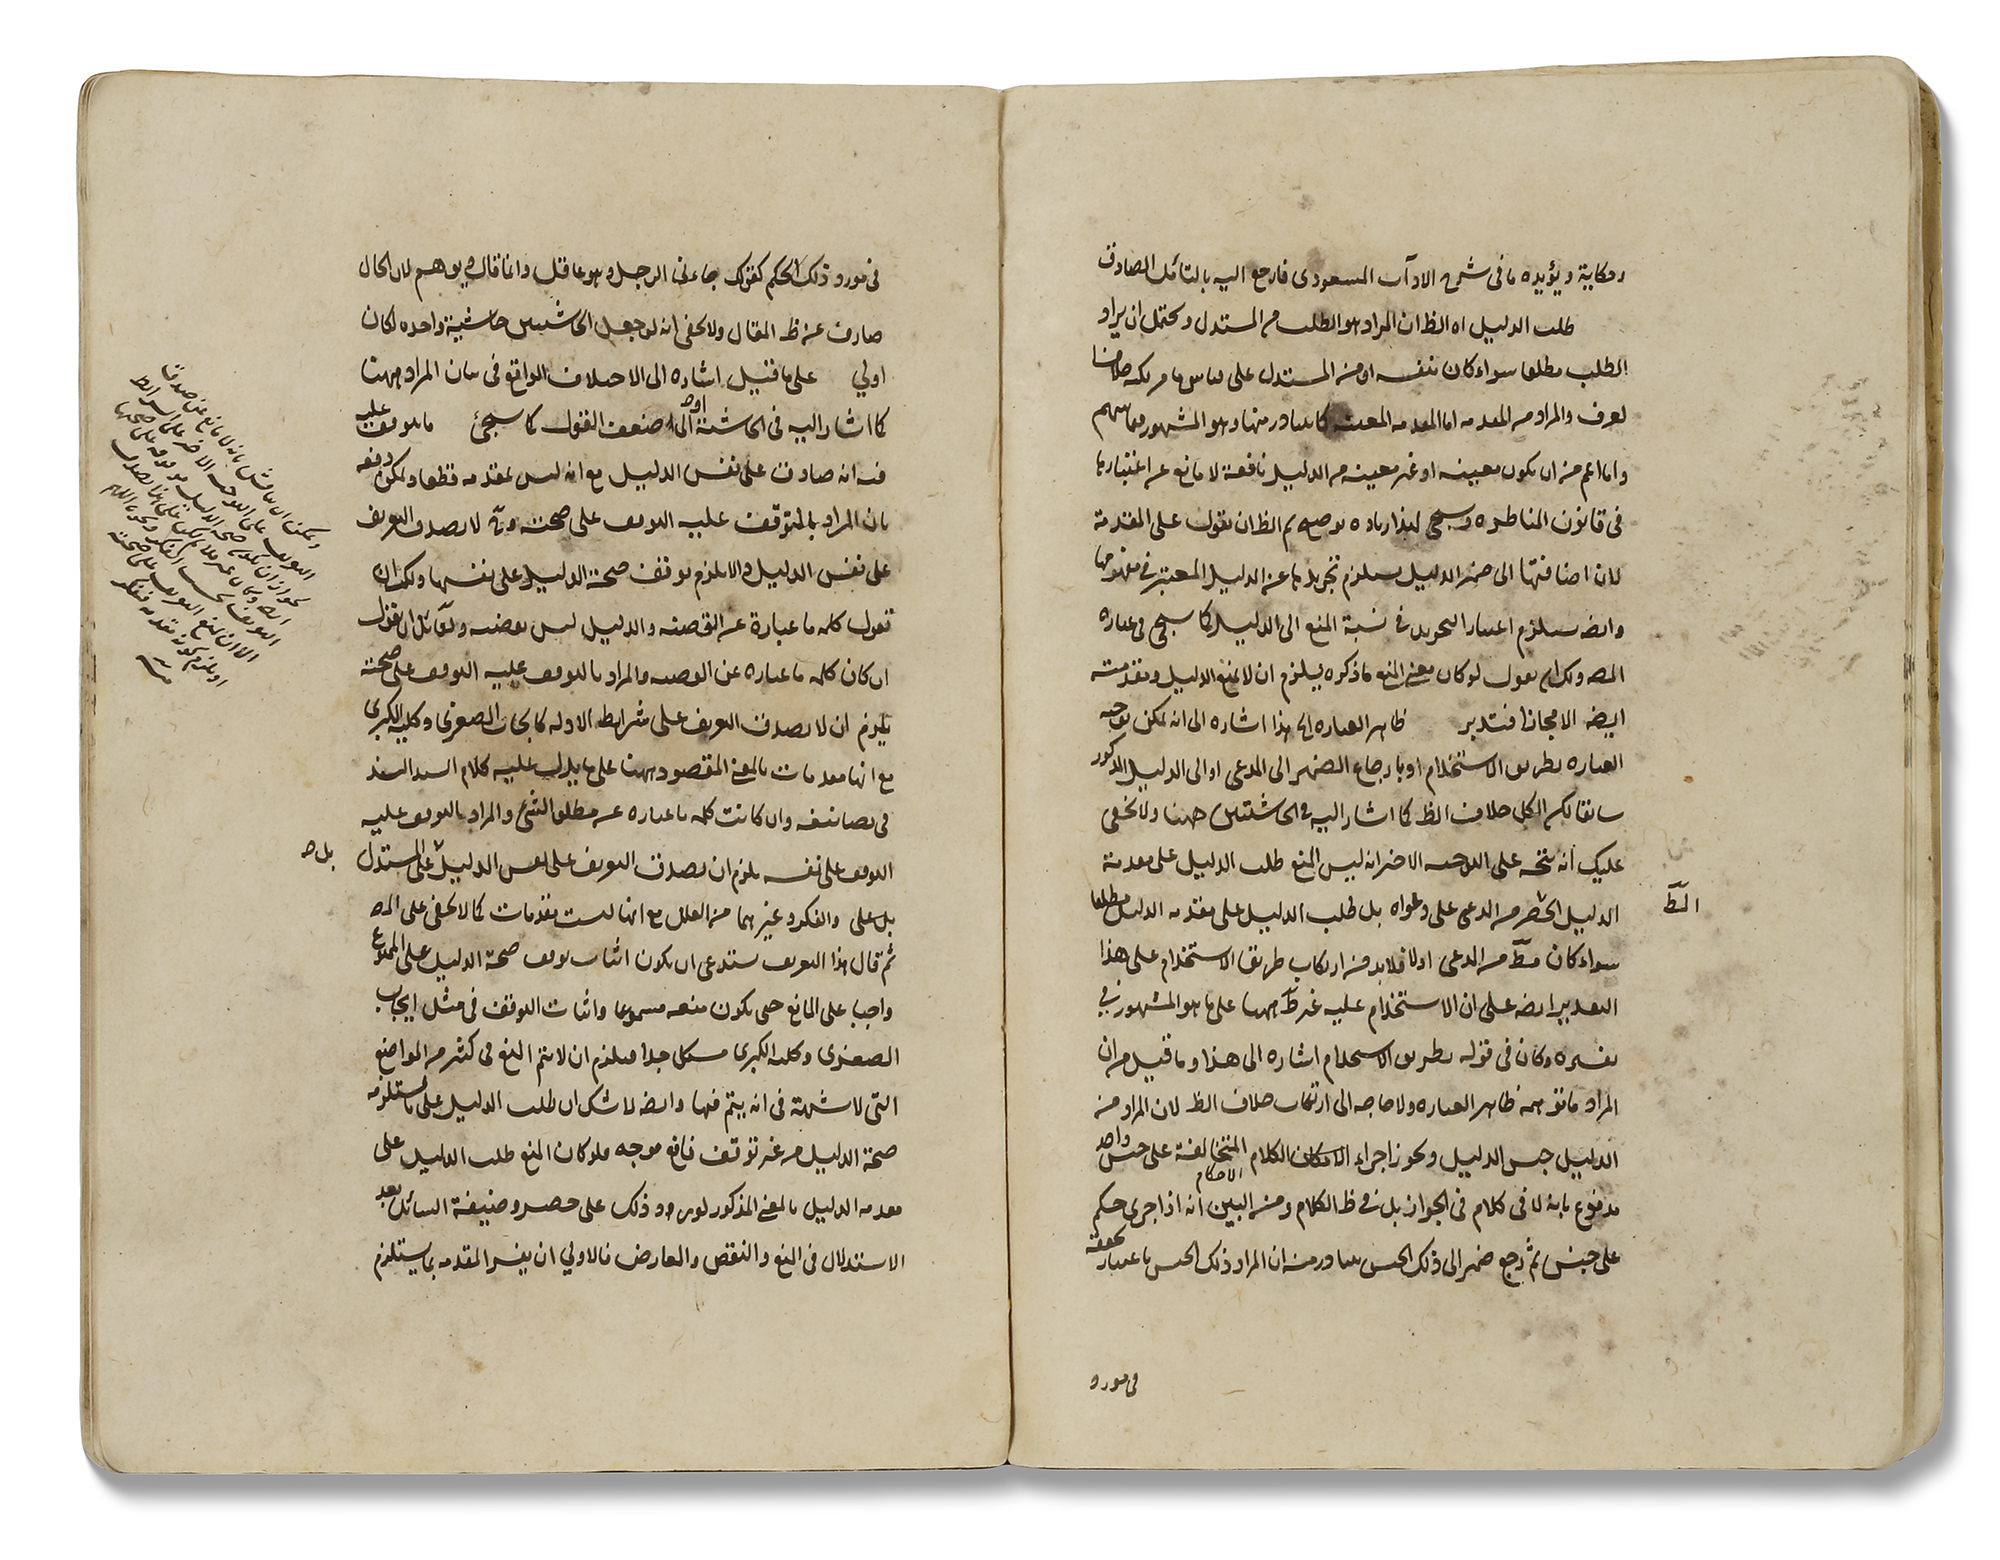 MIR ABUL FATAH IBN MIRZA MAKHDOOM AL-HUSAINI (D.974AH/ 1566AD), A TREATISE ON MATTERS CONCERNING THE - Image 4 of 8